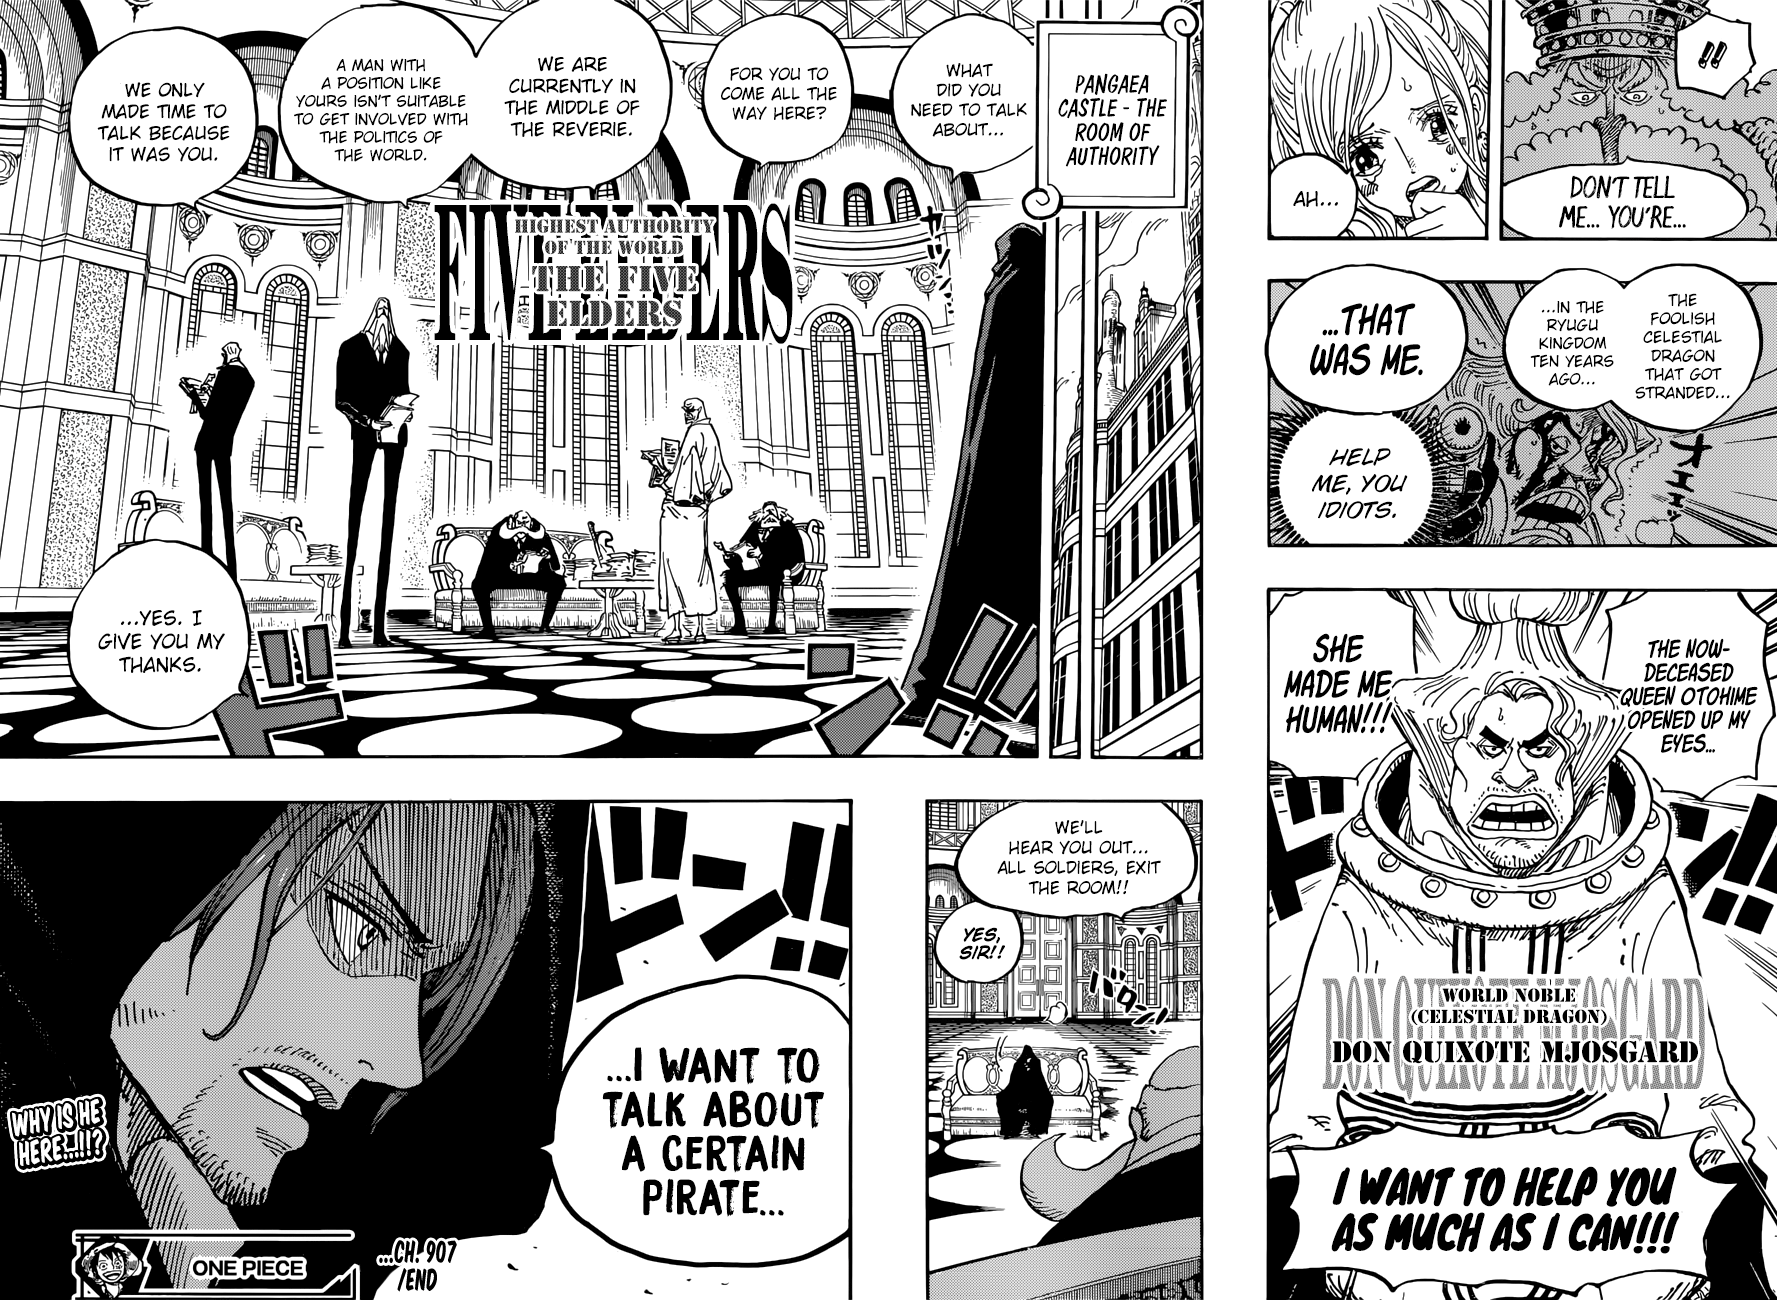 One Piece, Chapter 907 - The Empty Throne image 16